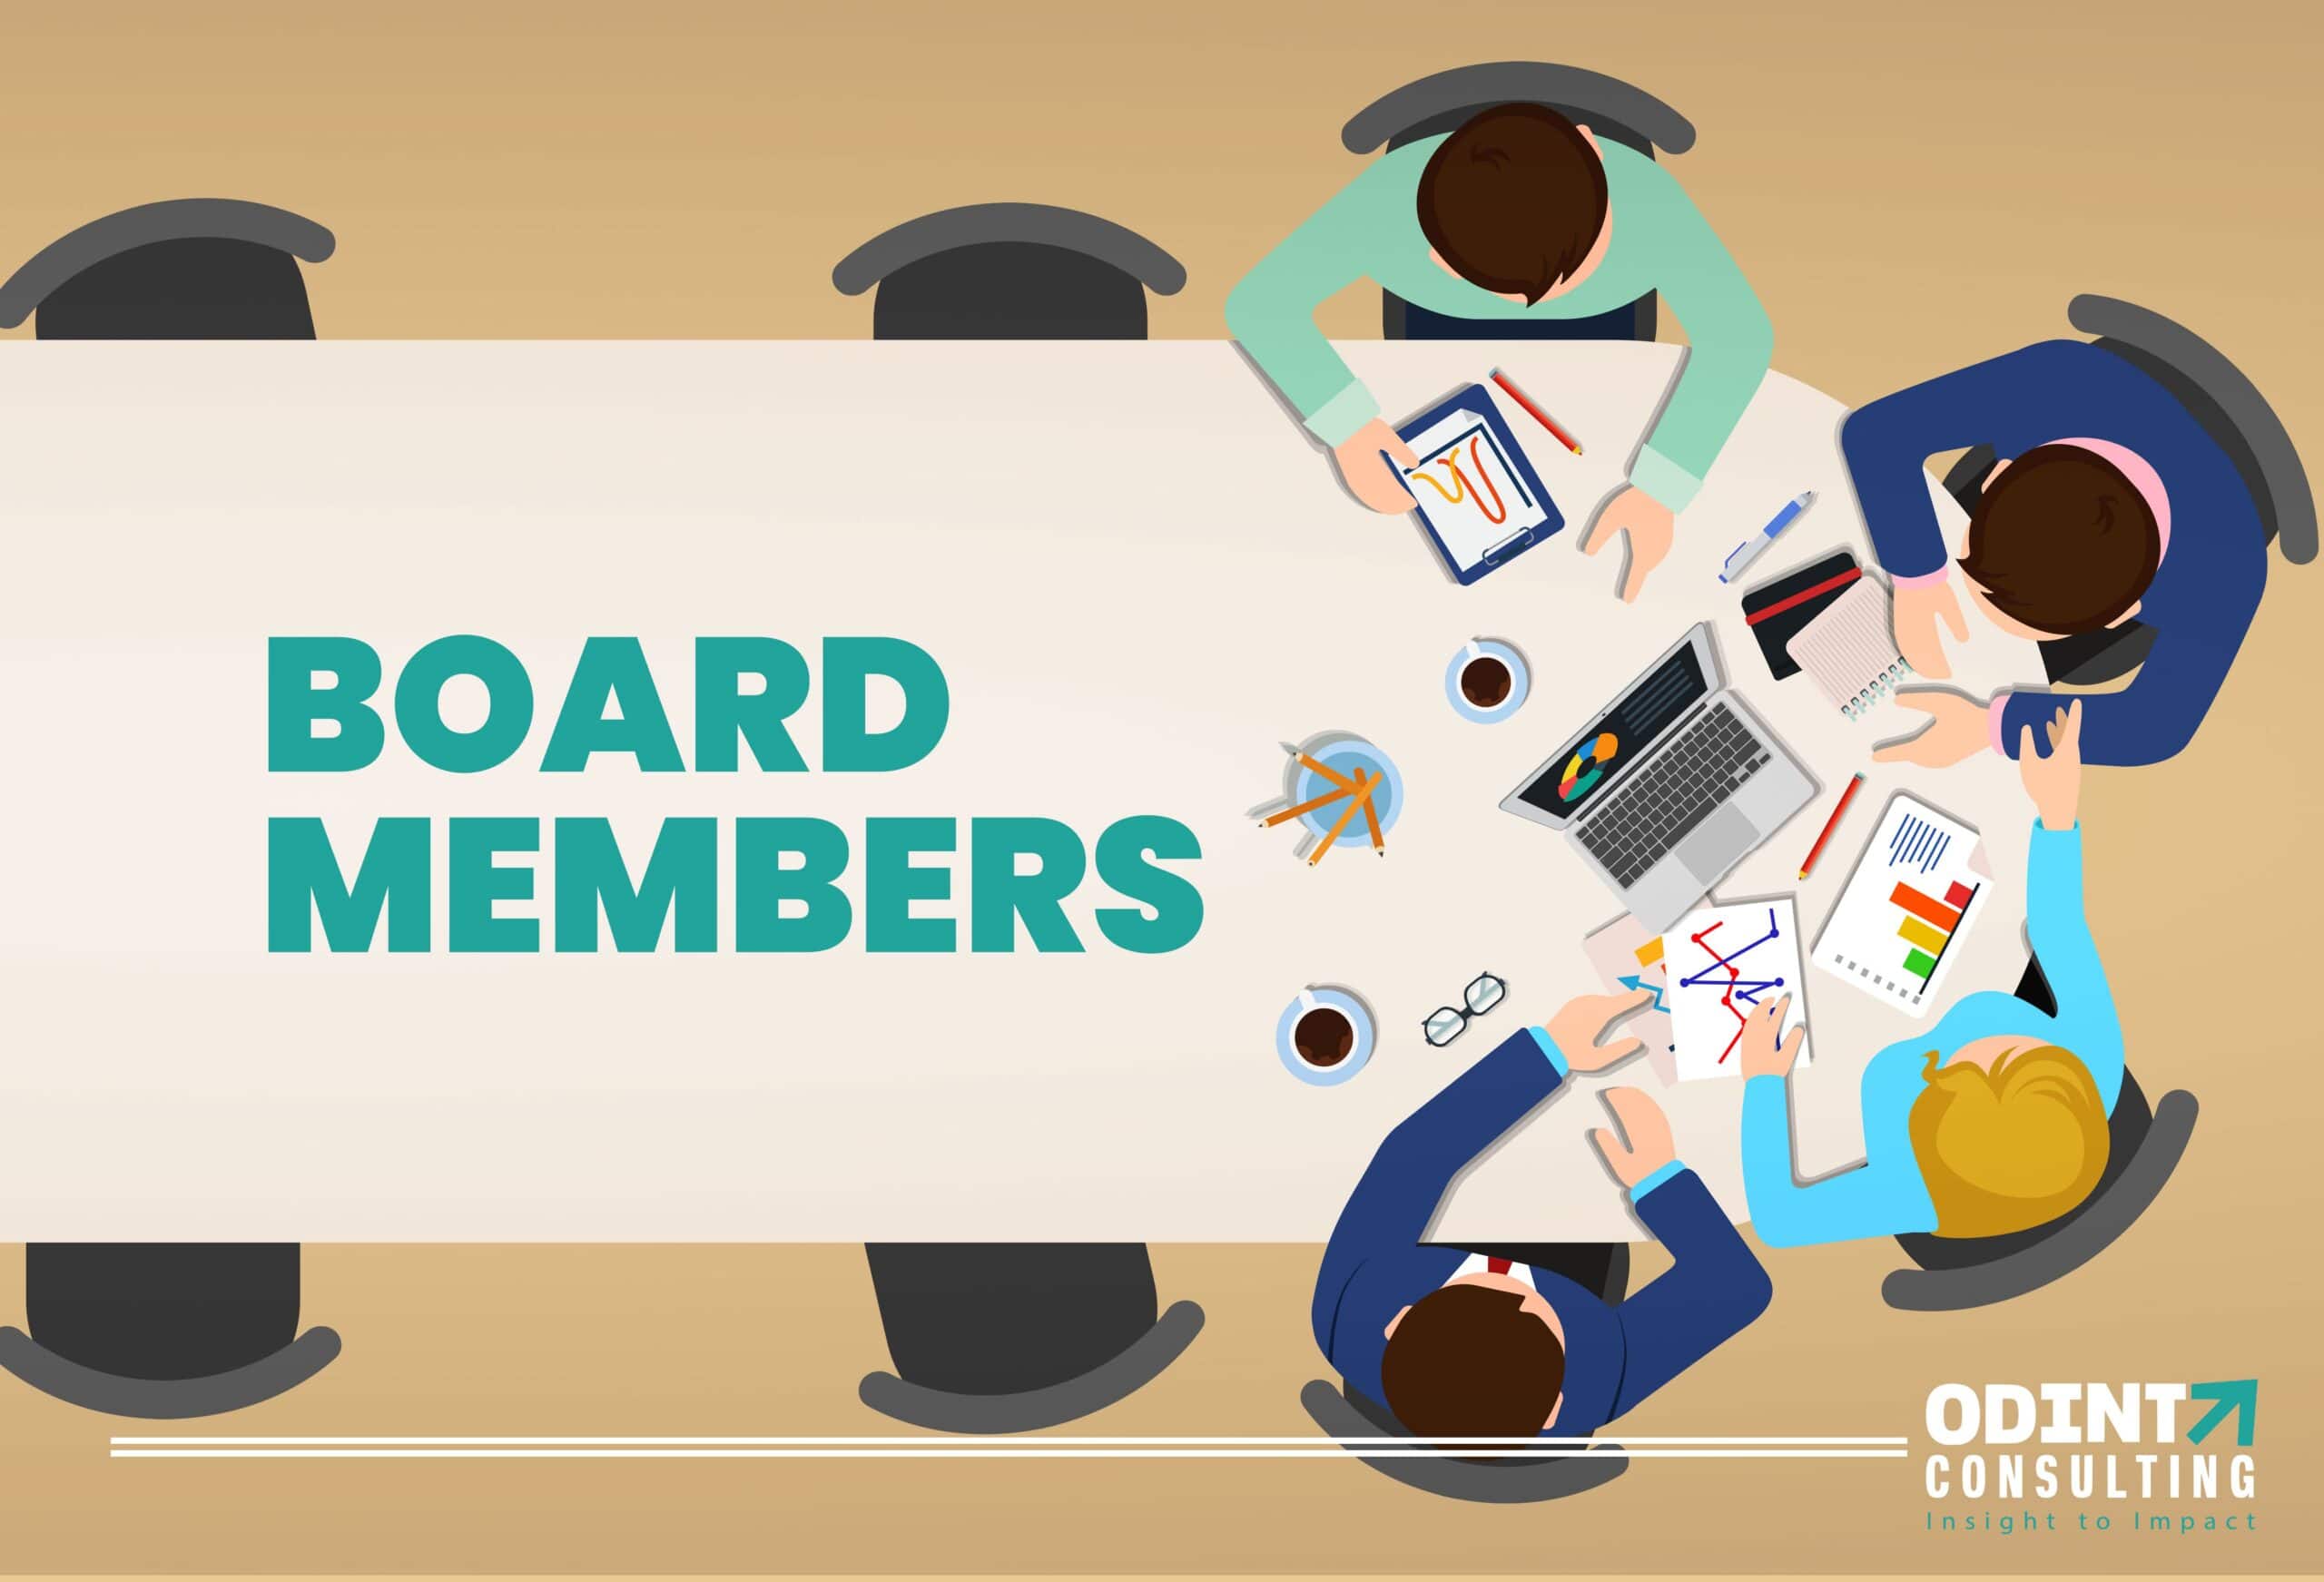 Board Members – Definition, Roles & Responsibilities Explained